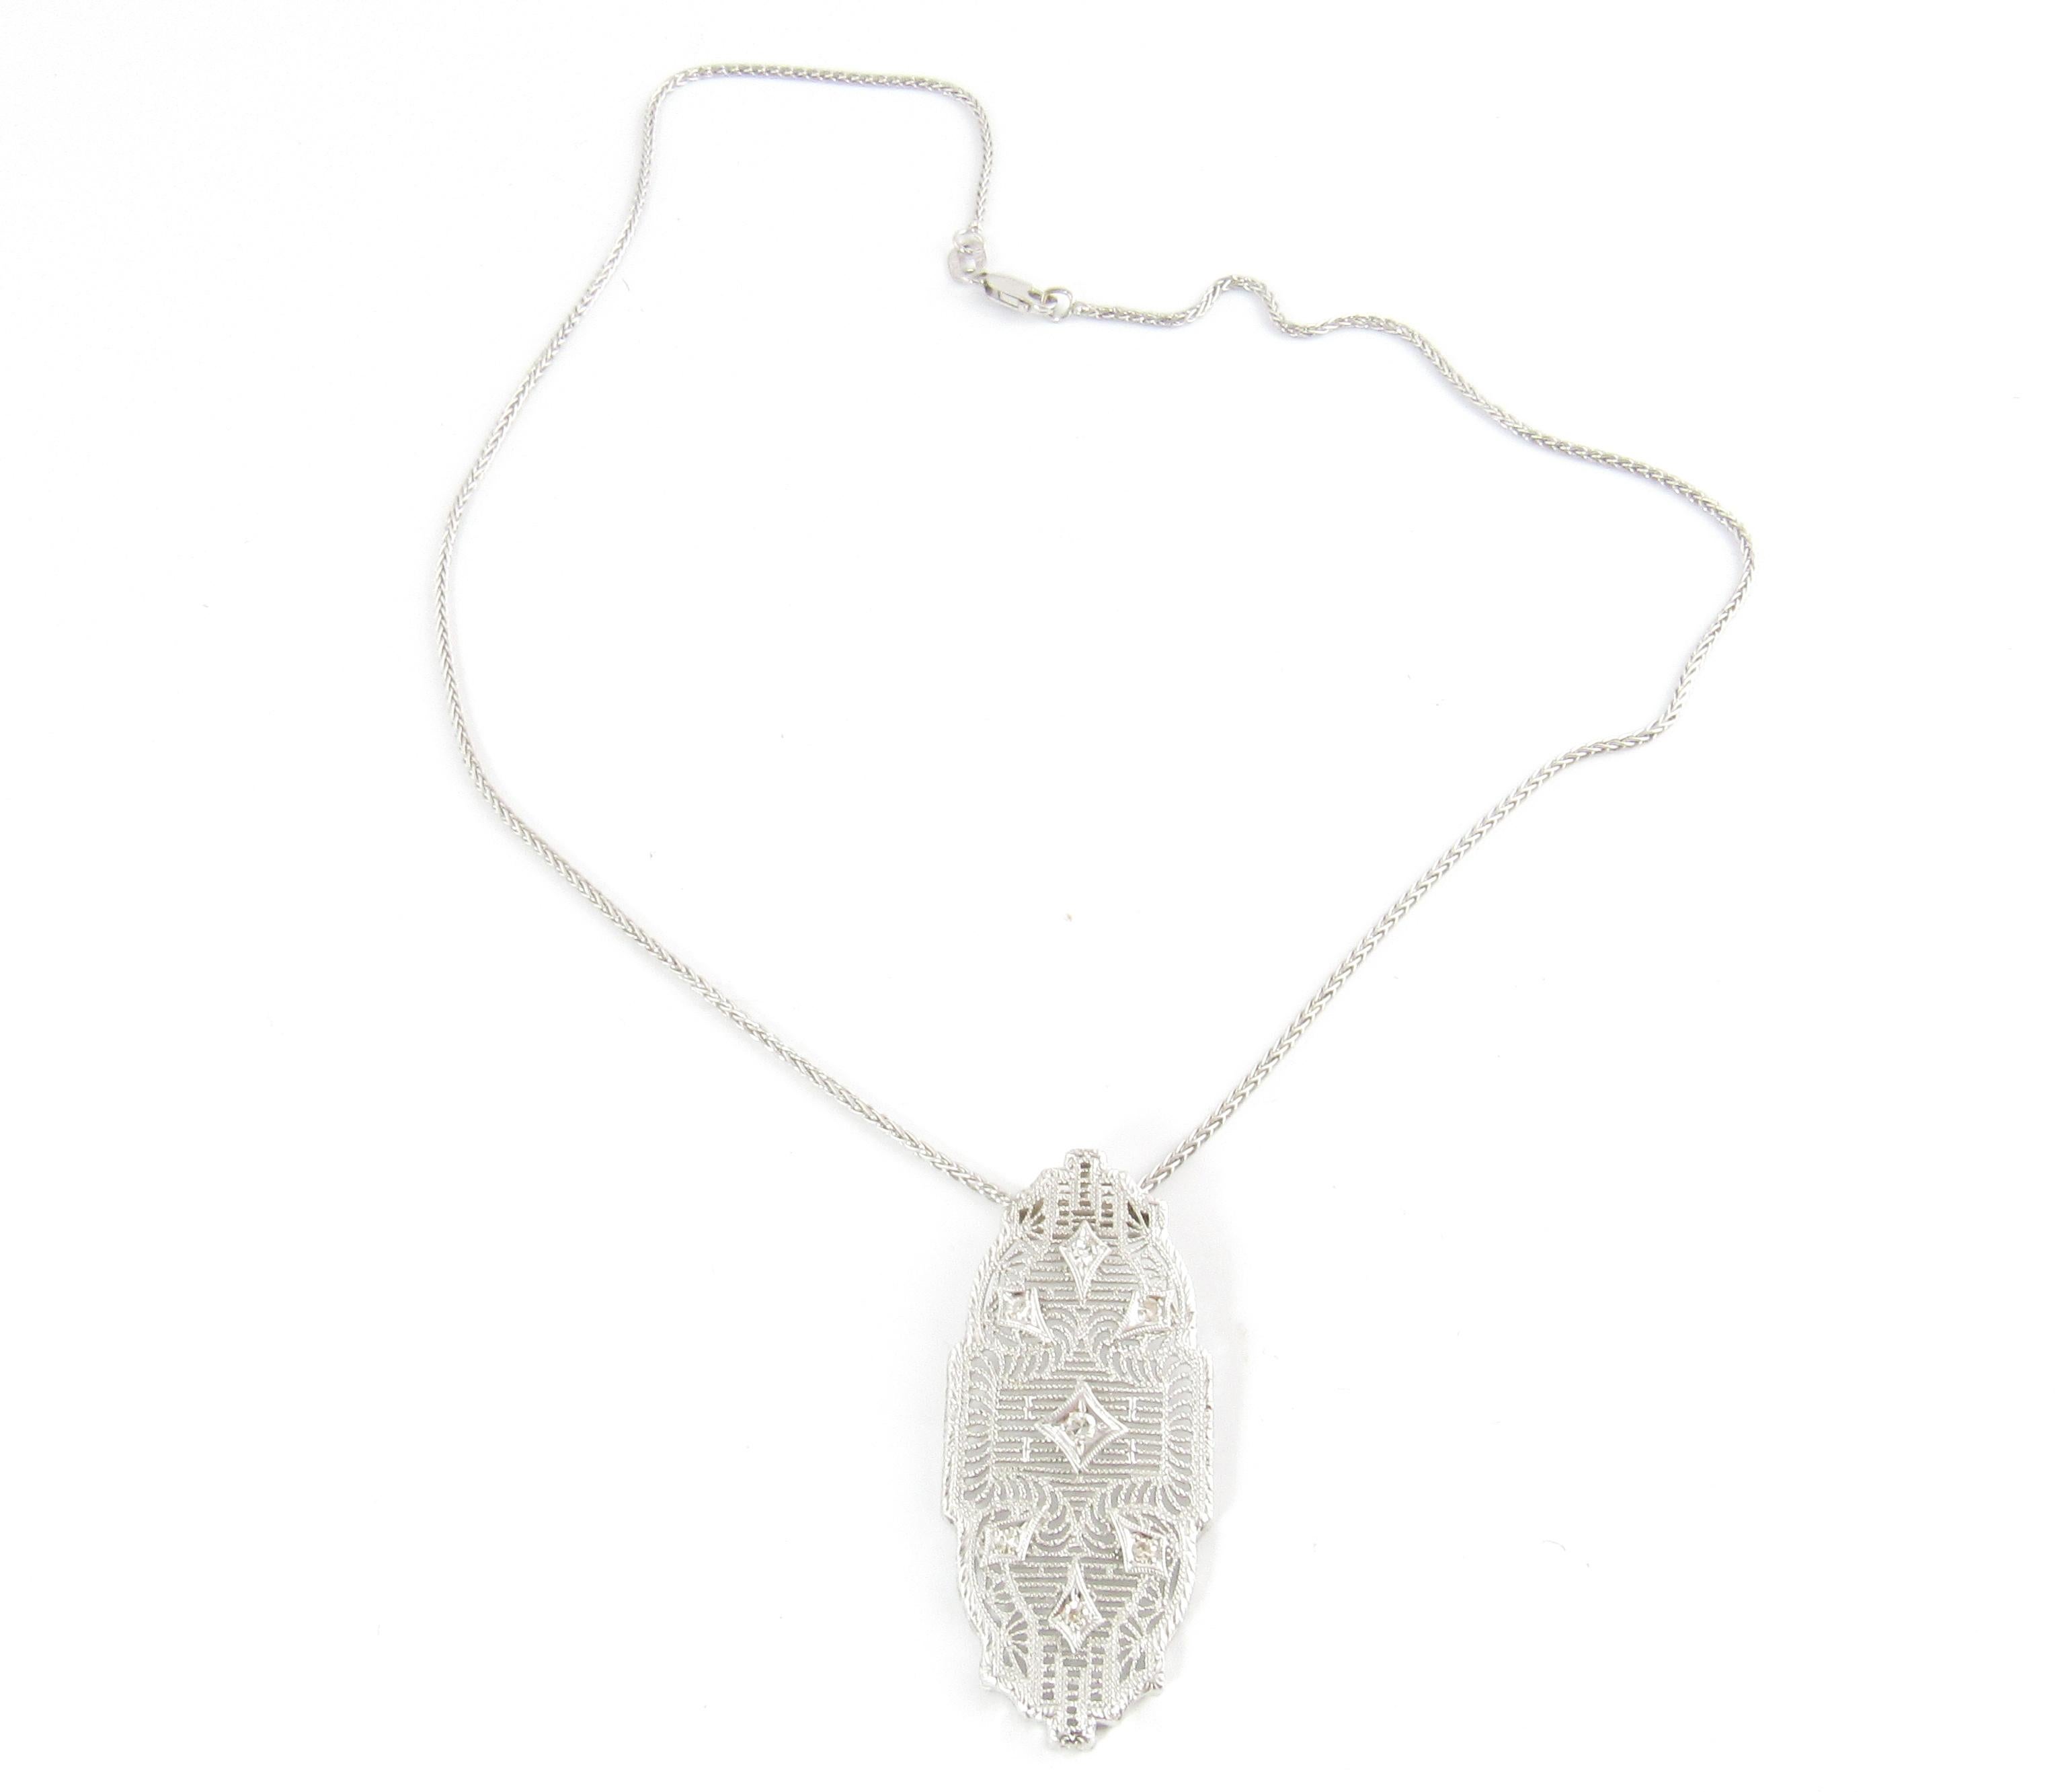 14 Karat White Gold Necklace and Diamond Pendant-

This stunning pendant features seven single cut diamonds set in beautifully detailed white gold filigree on a 16 inch white gold chain. 

Approximate total diamond weight: .15 ct.

Diamond clarity: